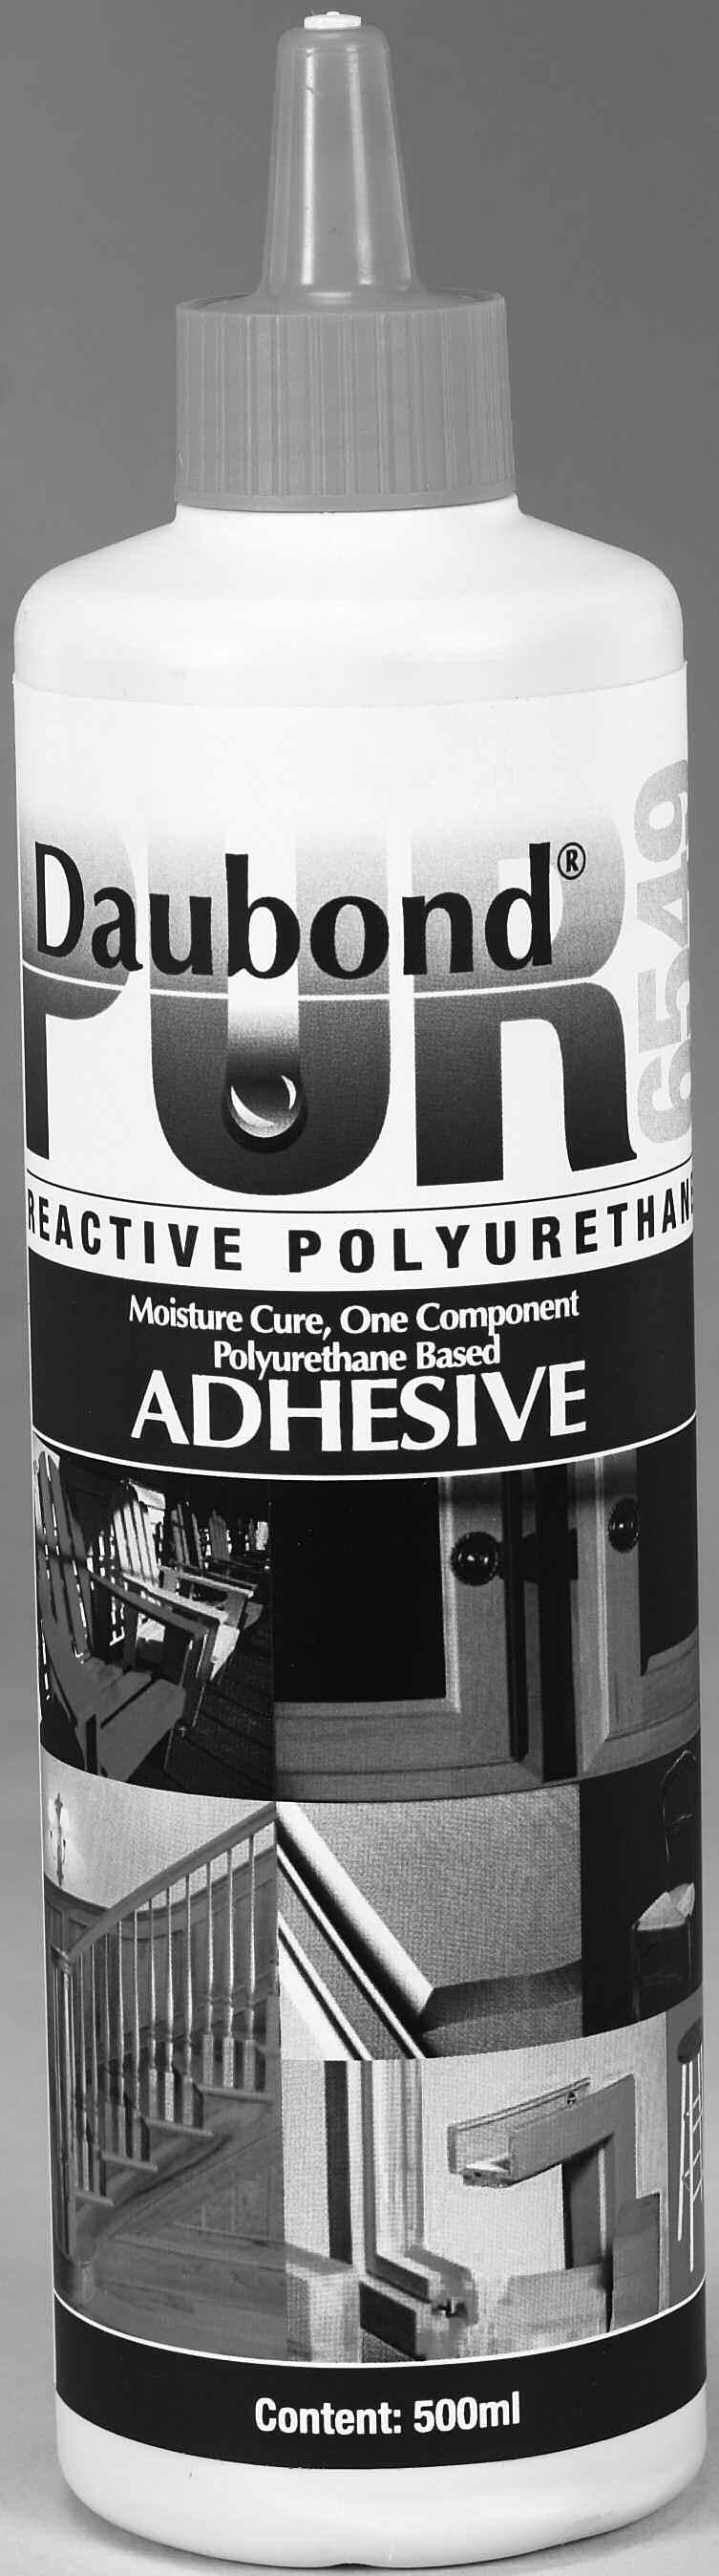 Moisture Cure Liquid Polyurethane Adhesive Single Part System Typical Applications Viscosity At 68 F (20 C) Open Time (1) At 68 F (20 C) Wt/Gallon Application Method Press Time (2) At 68 F (20 C) At